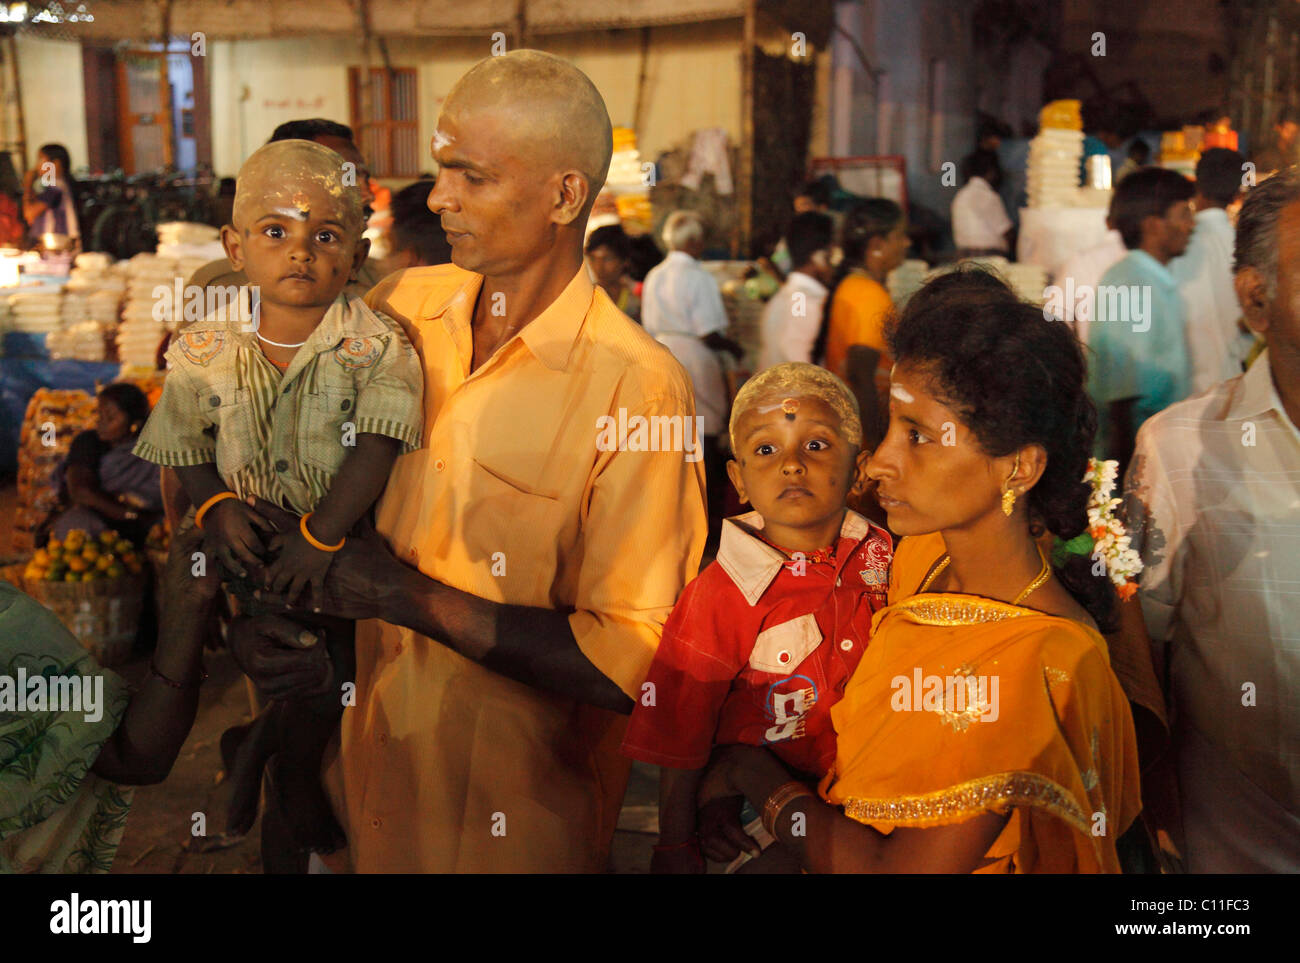 Parents and two boys with painted bald heads, Hindu pilgrims, Thaipusam Festival in , Tamilnadu, South India, India, Asia Stock Photo